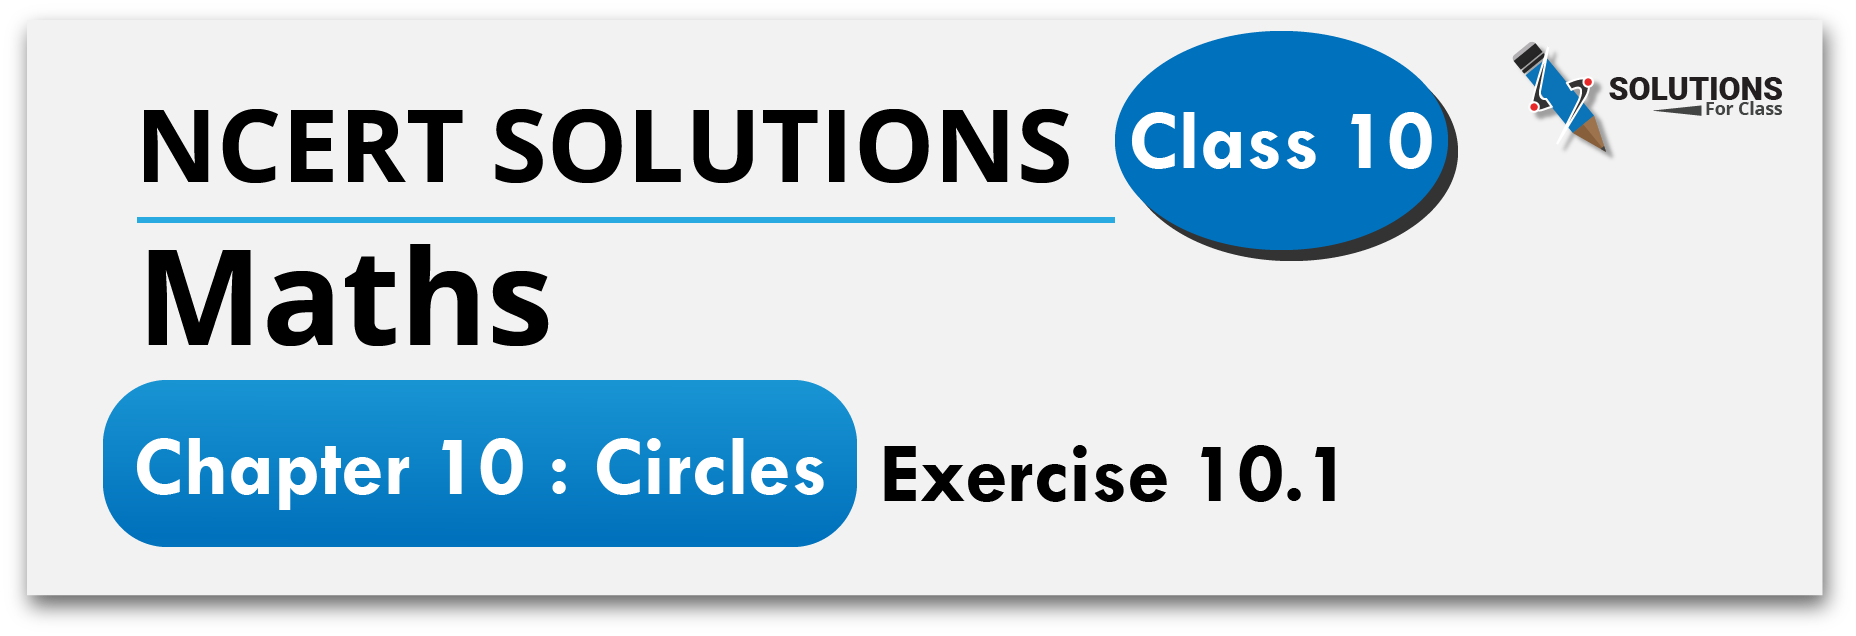 NCERT Solutions For Class 10, Maths, Chapter 10, Circles, Exercise 10.1